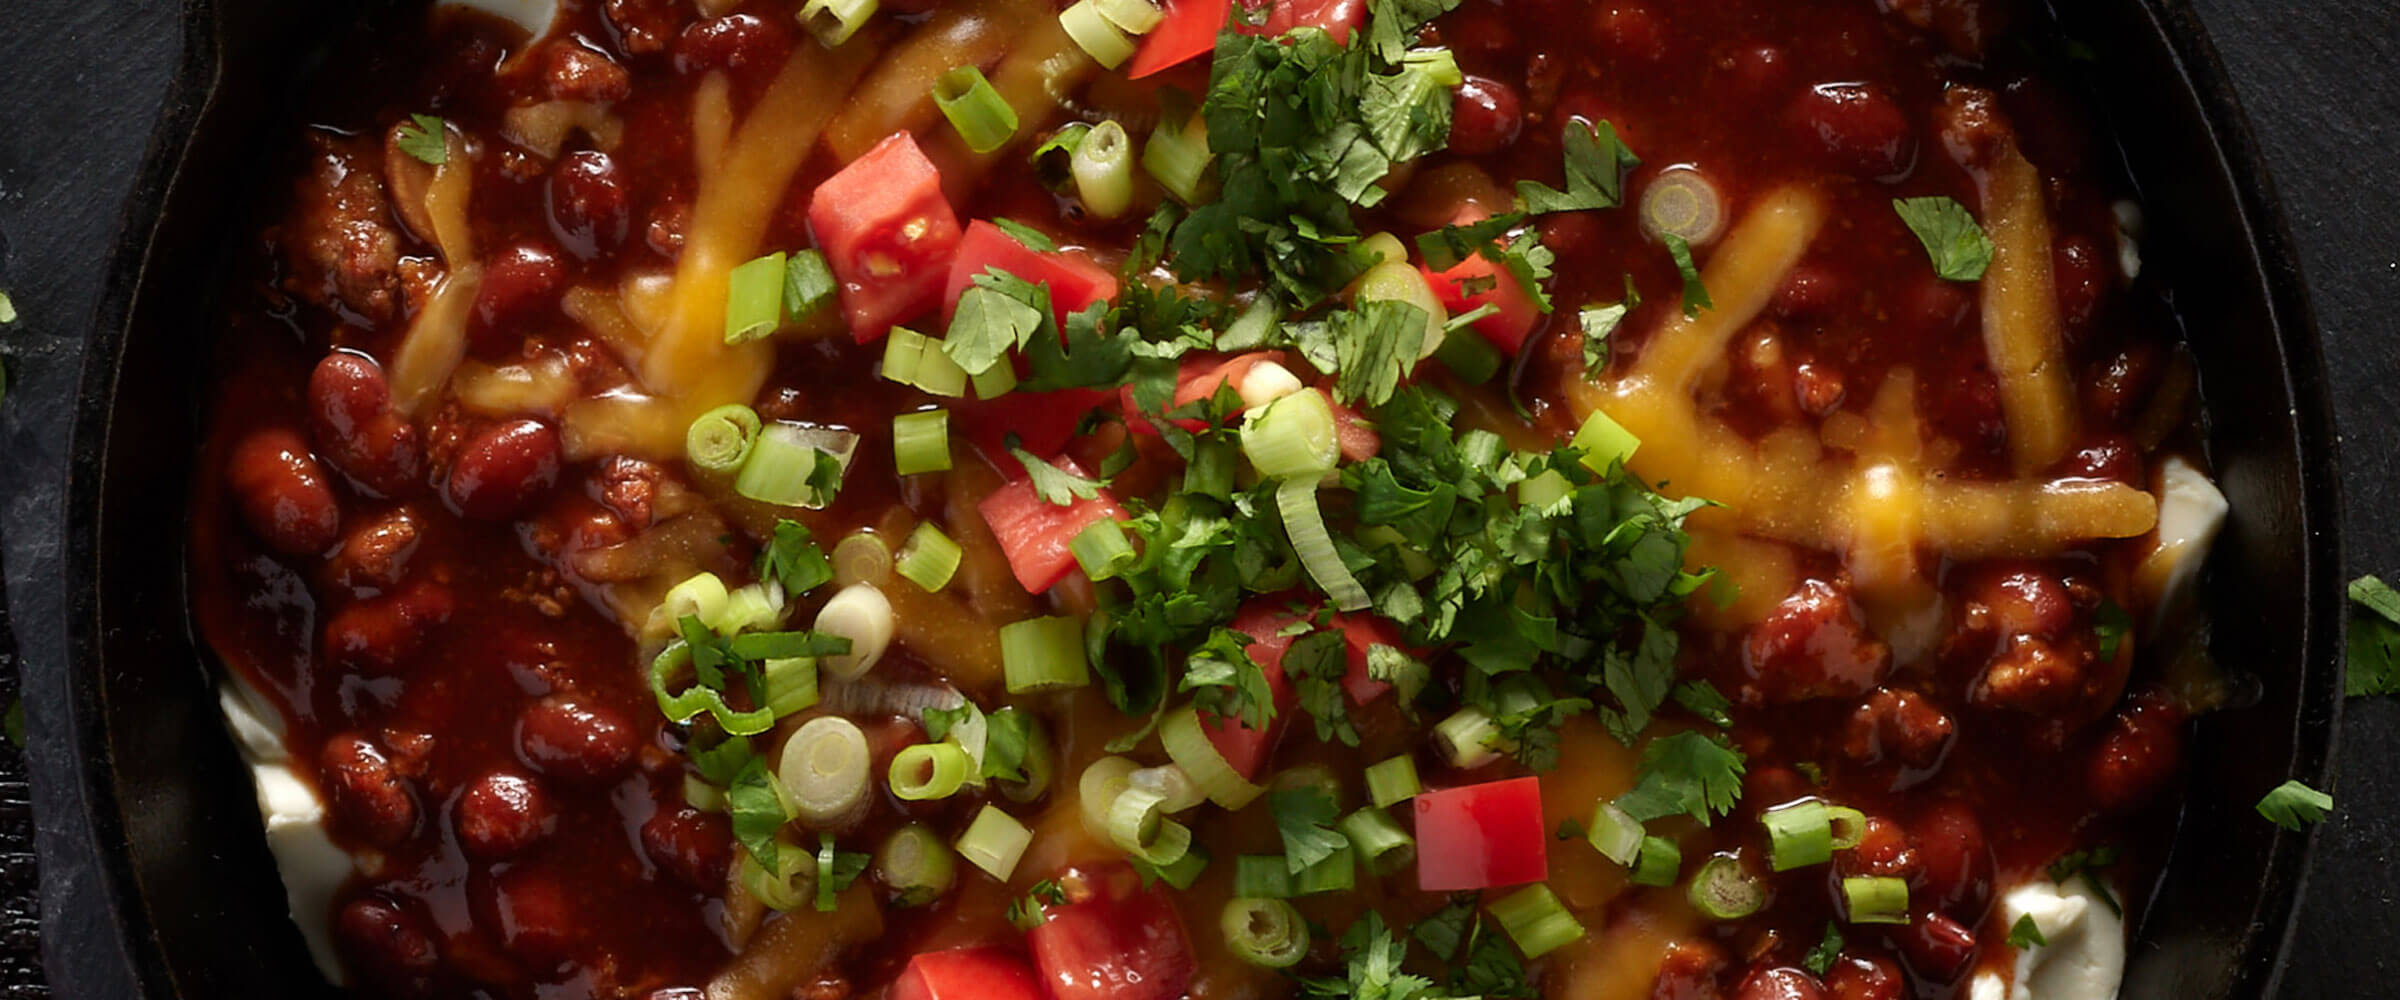 Hot Chili Cheese Dip in black bowl topped with tomato, green onion and cilantro